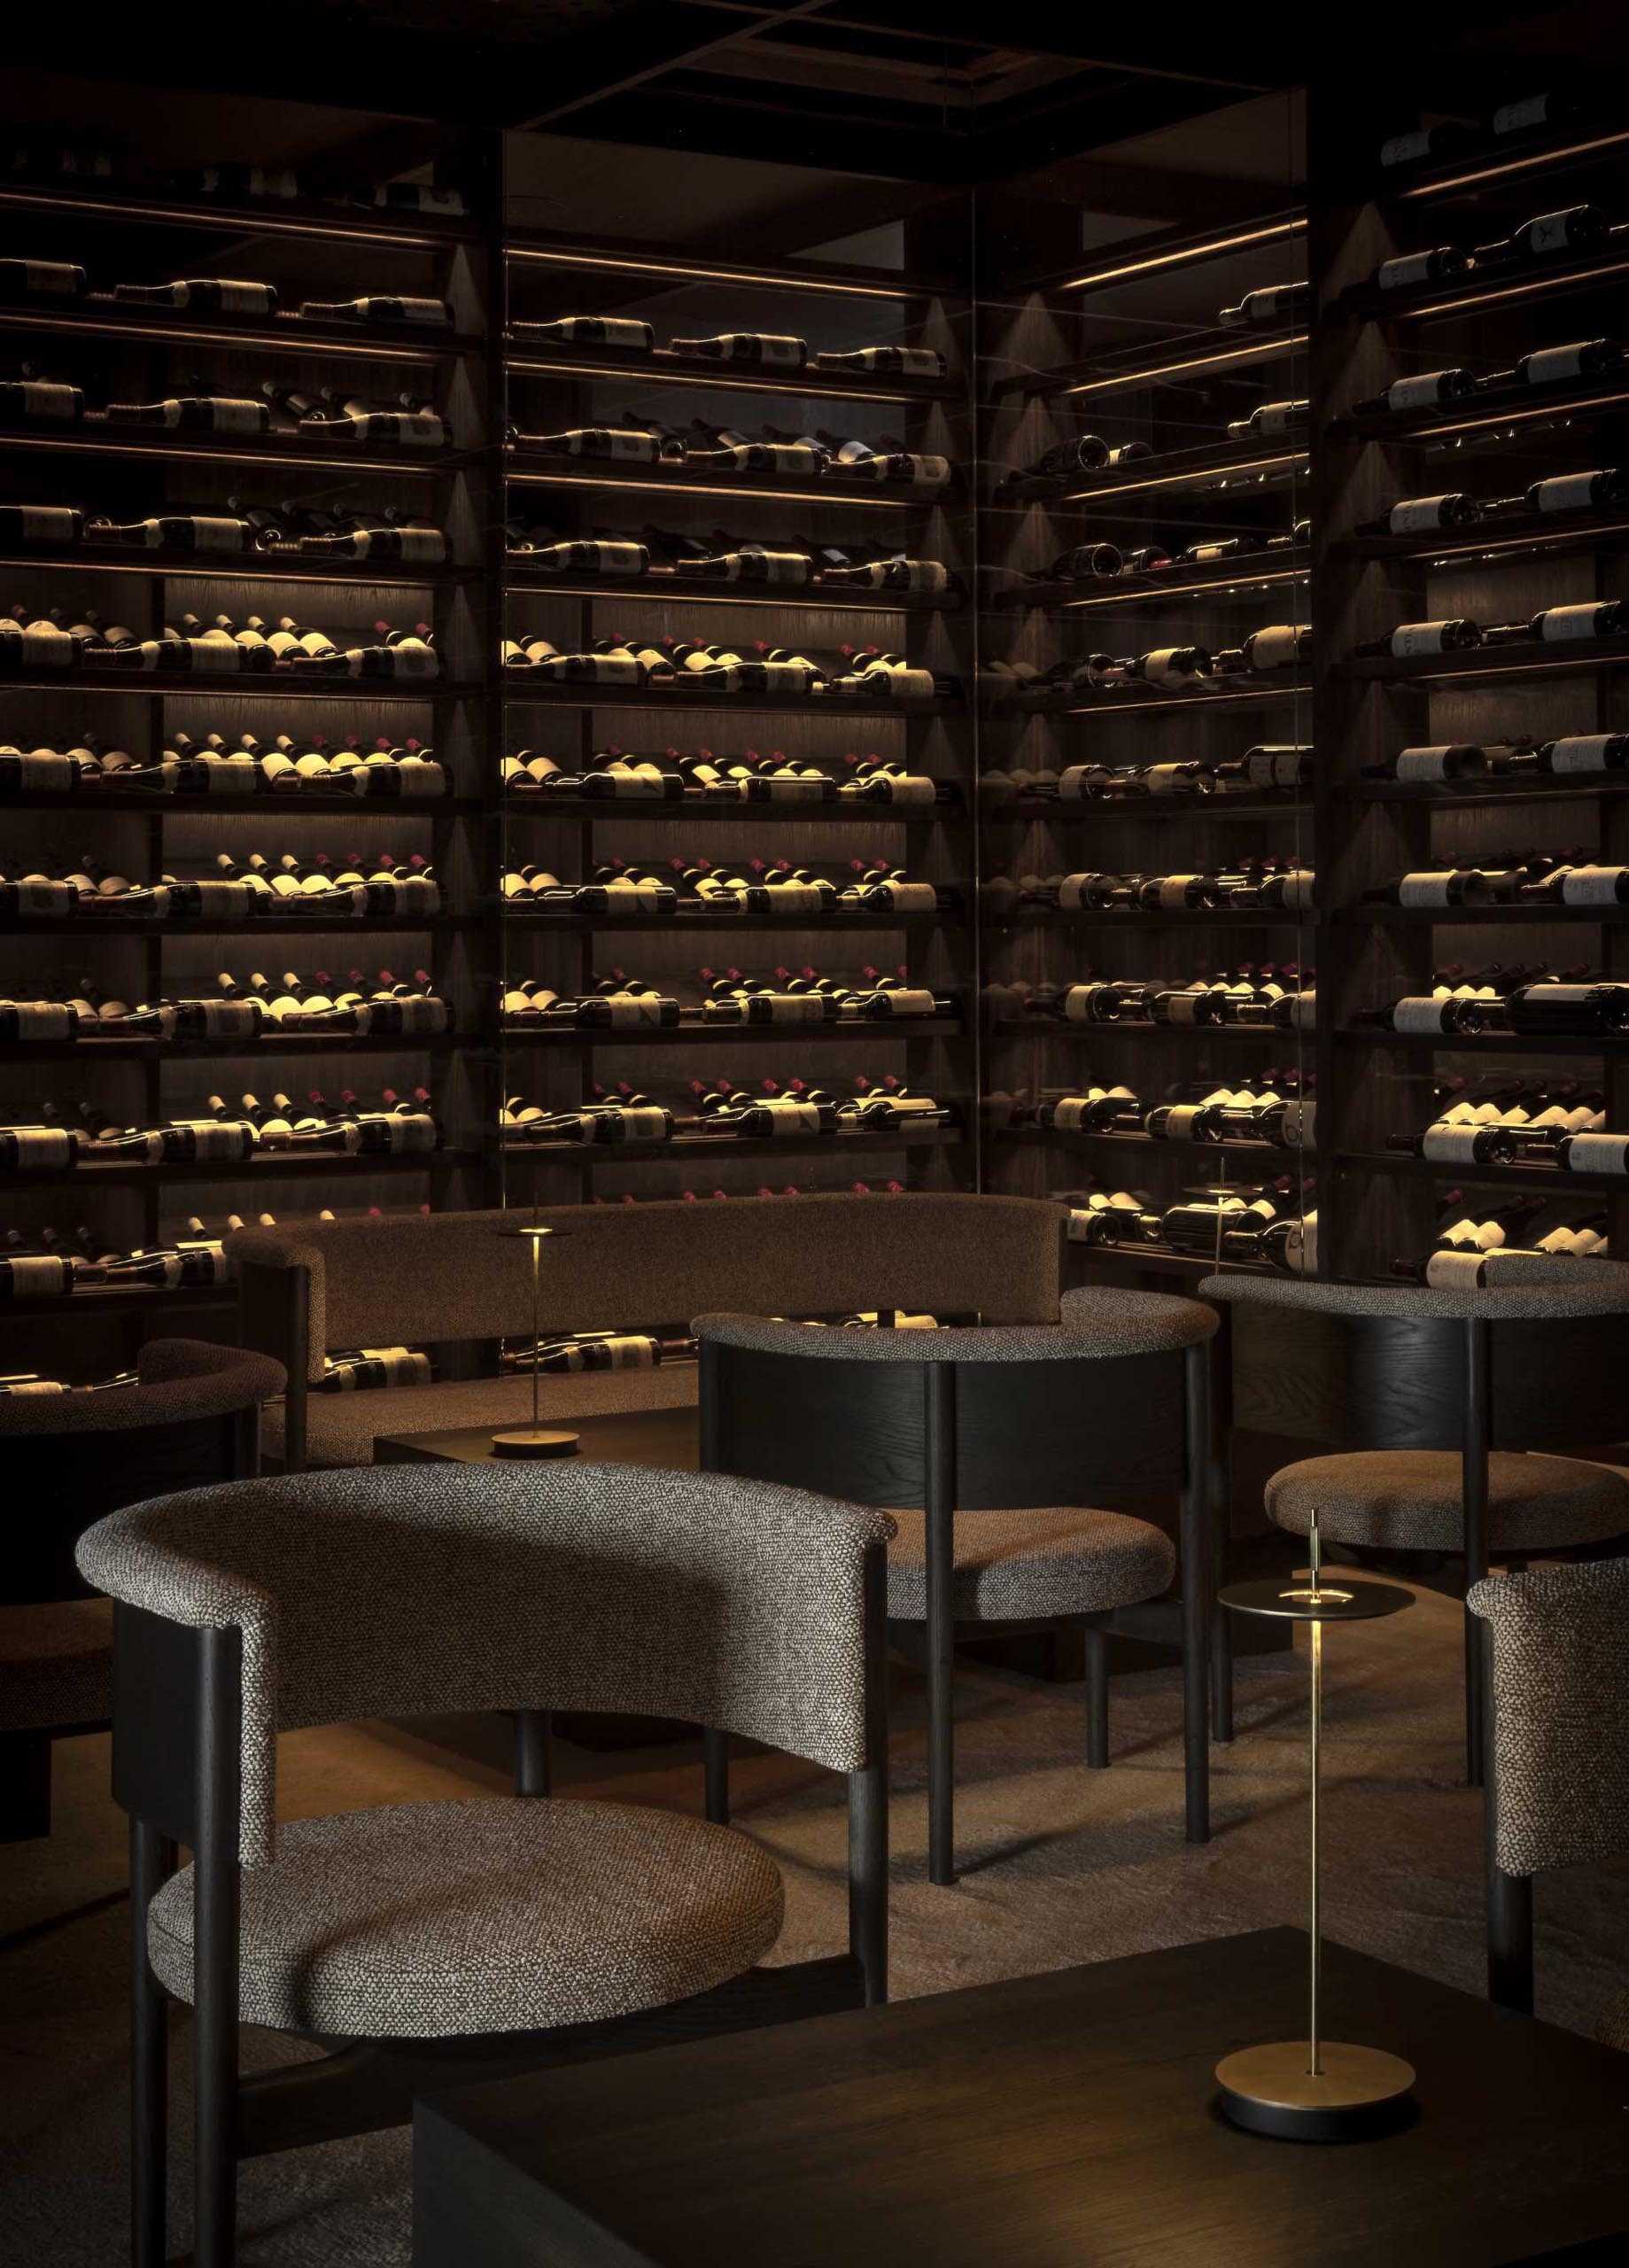 A dark and moody wine cellar with dark wood shelves and comfortable chairs.